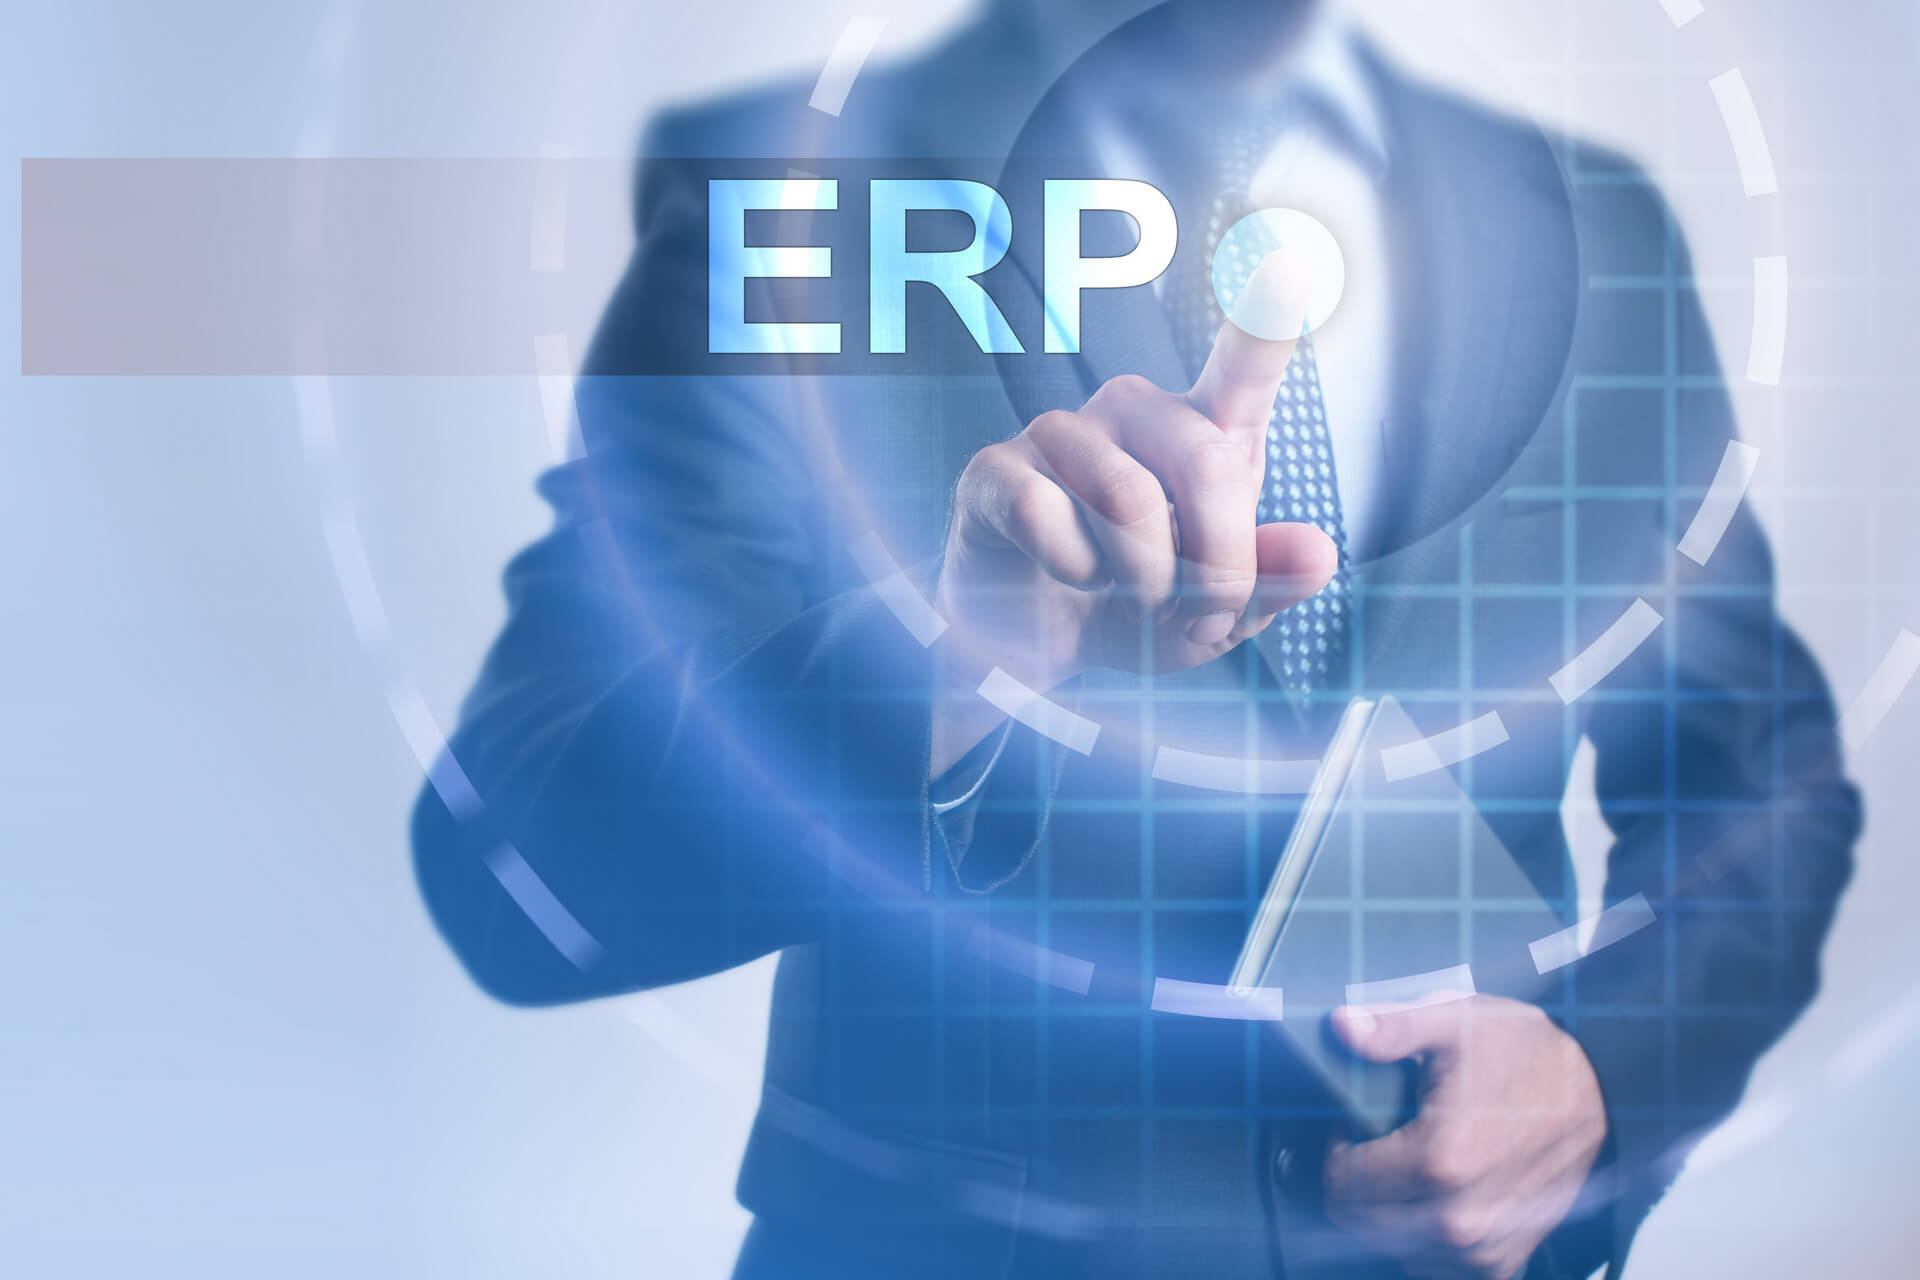 Man in suit clicking on a clear screen with ERP letters